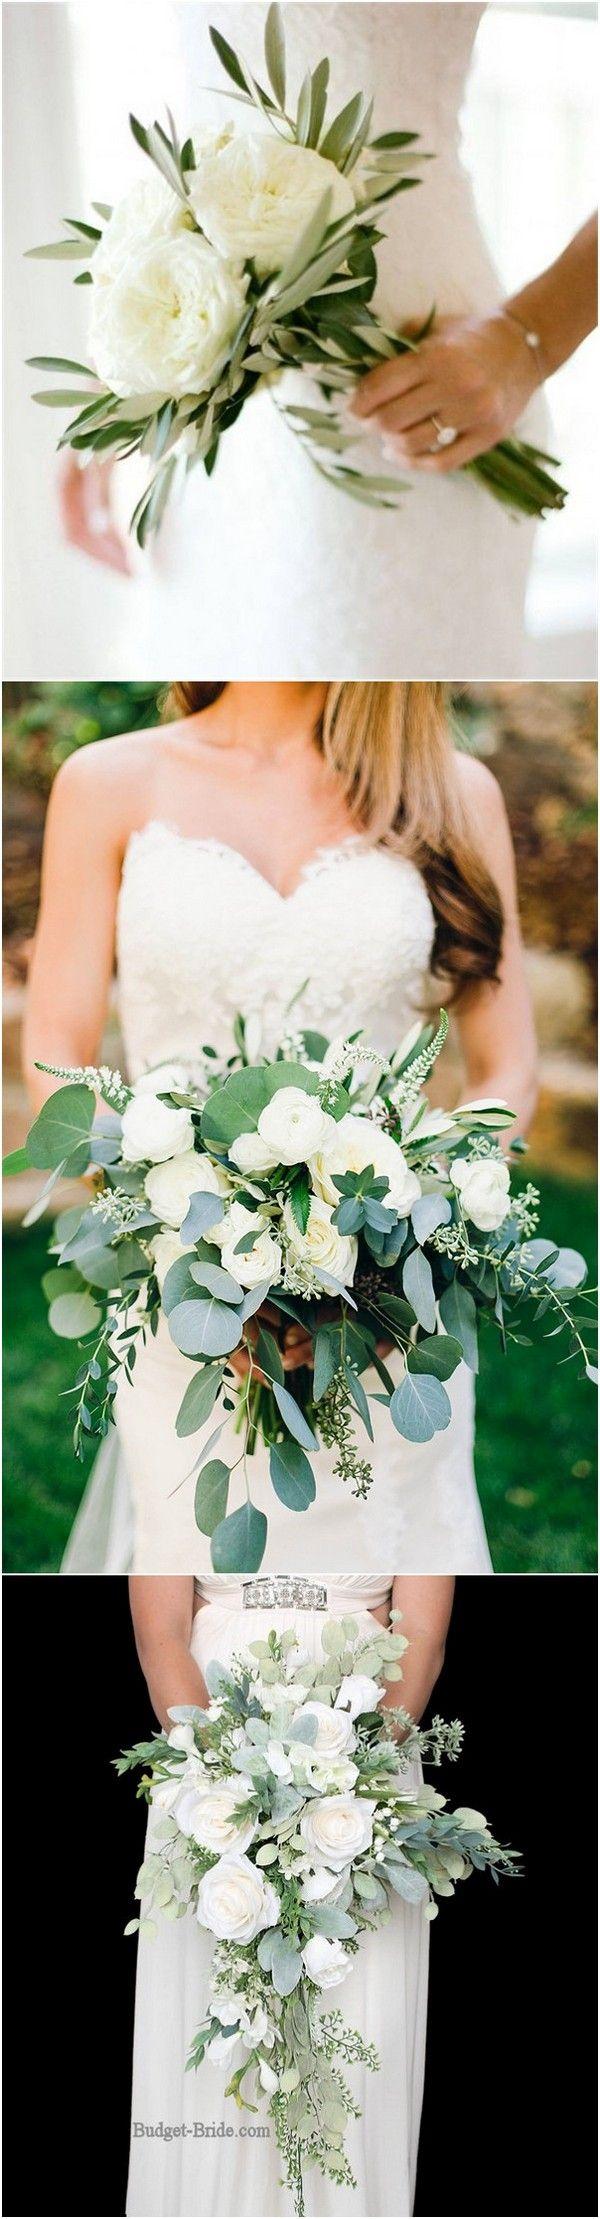 Hochzeit - Top 10 White And Green Wedding Bouquet Ideas You’ll Love - Page 2 Of 2